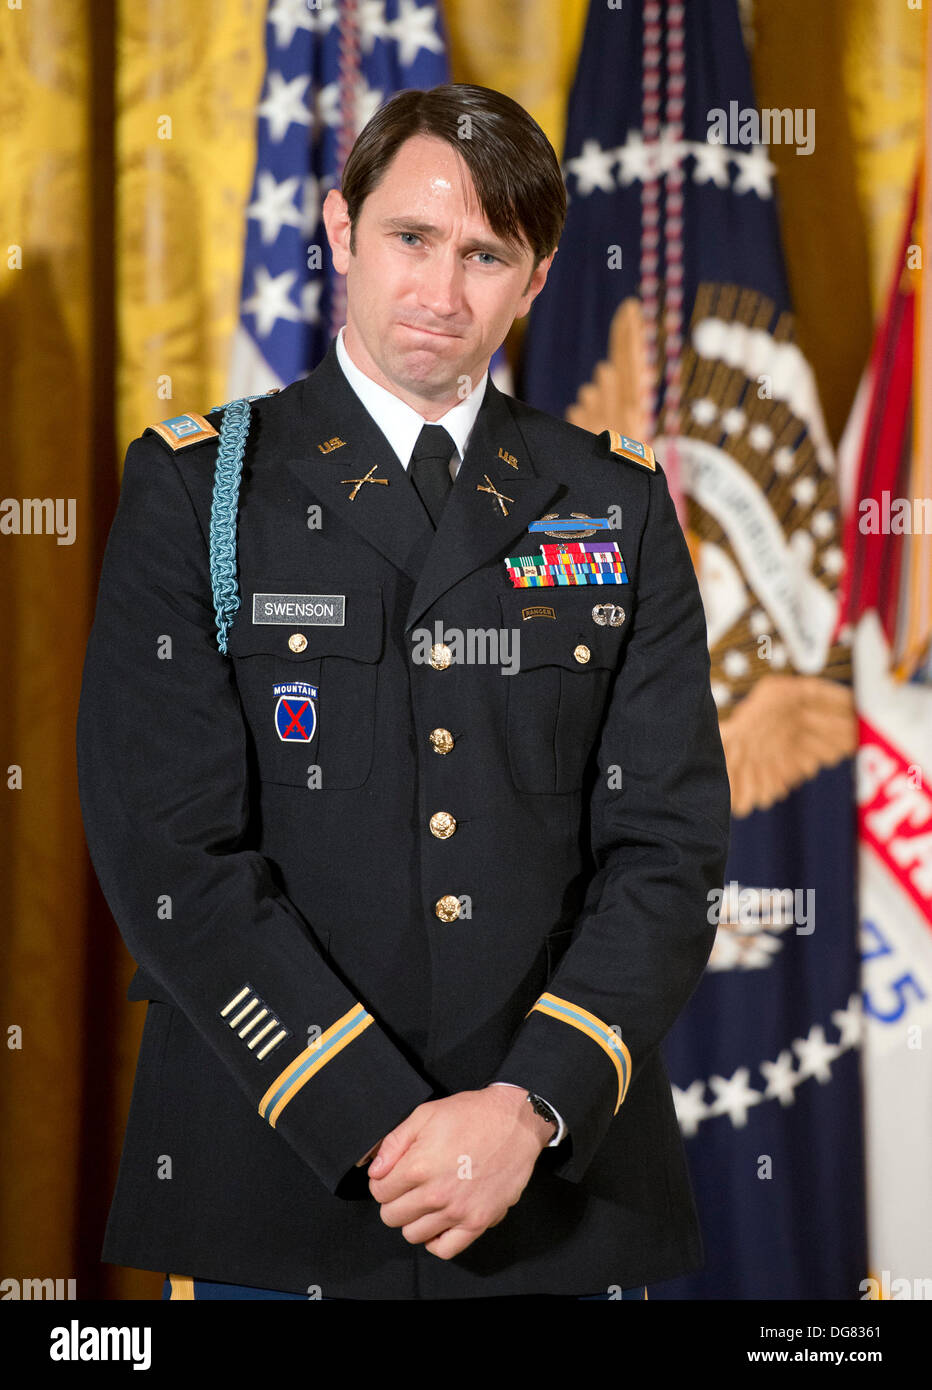 William Swenson, a former active duty Army Captain, who will be awarded the Medal of Honor for conspicuous gallantry, listens as United States President Barack Obama makes remarks in the East Room of the White House in Washington, DC on October 14, 2013. Captain Swenson accepted the Medal of Honor for his courageous actions while serving as an Embedded Trainer and Mentor of the Afghan National Security Forces with Afghan Border Police Mentor Team, 1st Battalion, 32nd Infantry Regiment, 3rd Brigade Combat Team, 10th Mountain Division, during combat operations in Kunar Province, Afghanistan on Stock Photo